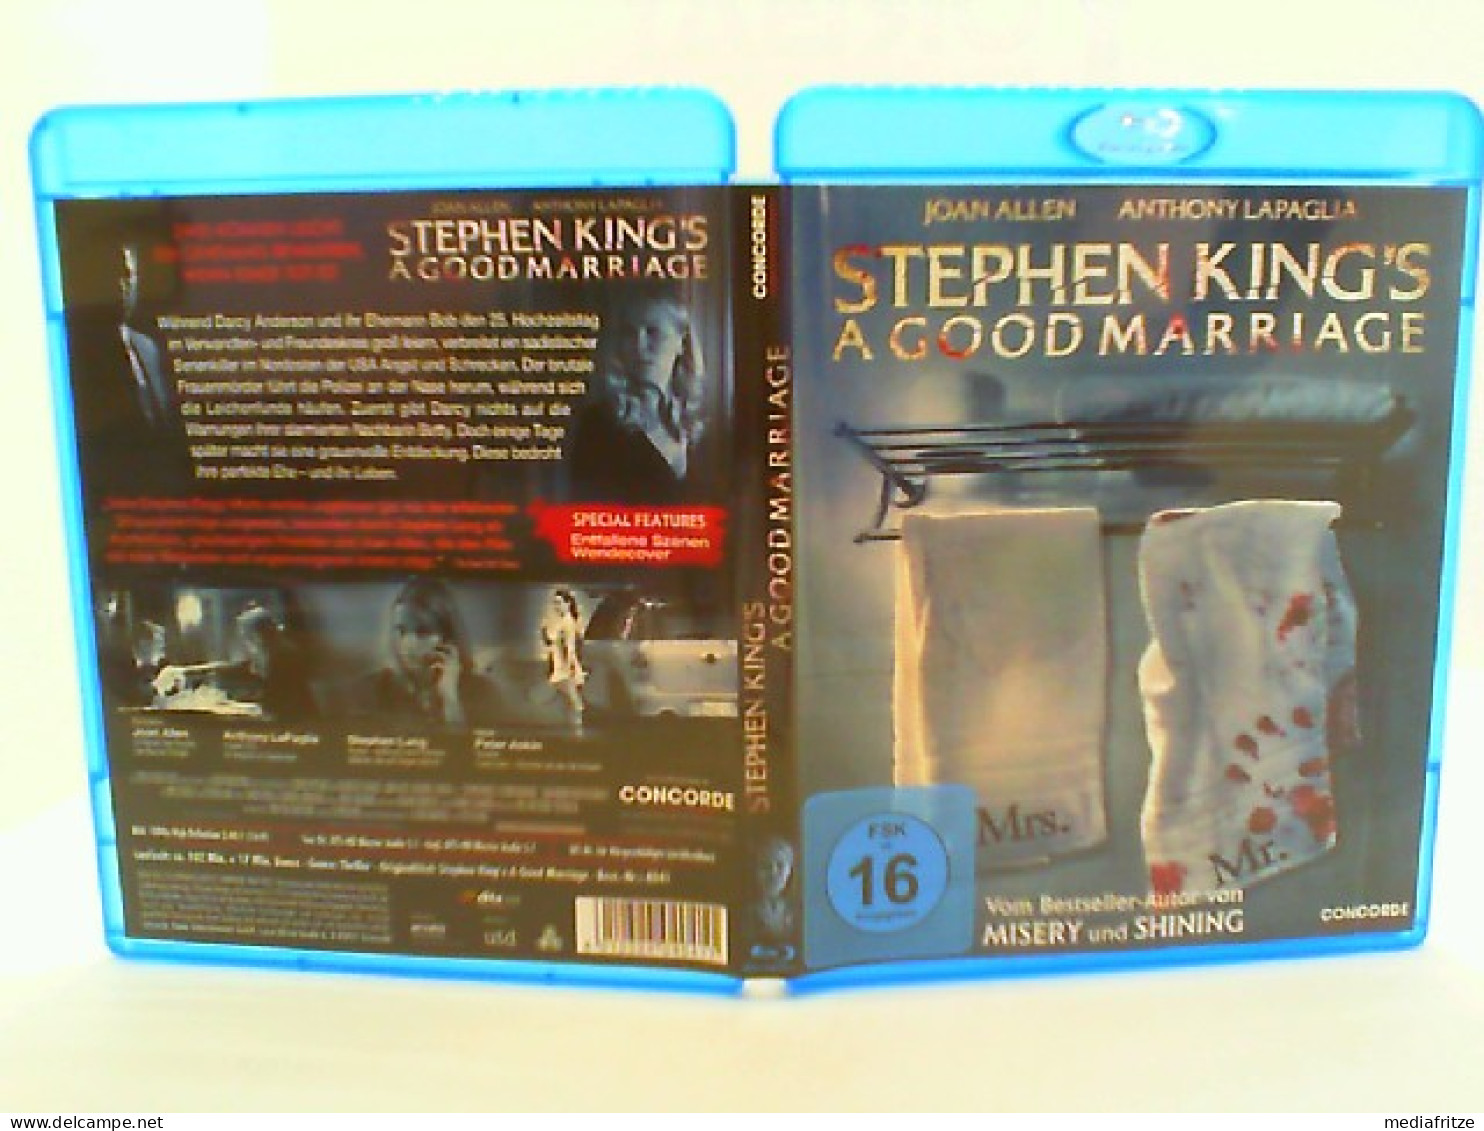 Stephen King's A Good Marriage [Blu-ray] - Other Formats